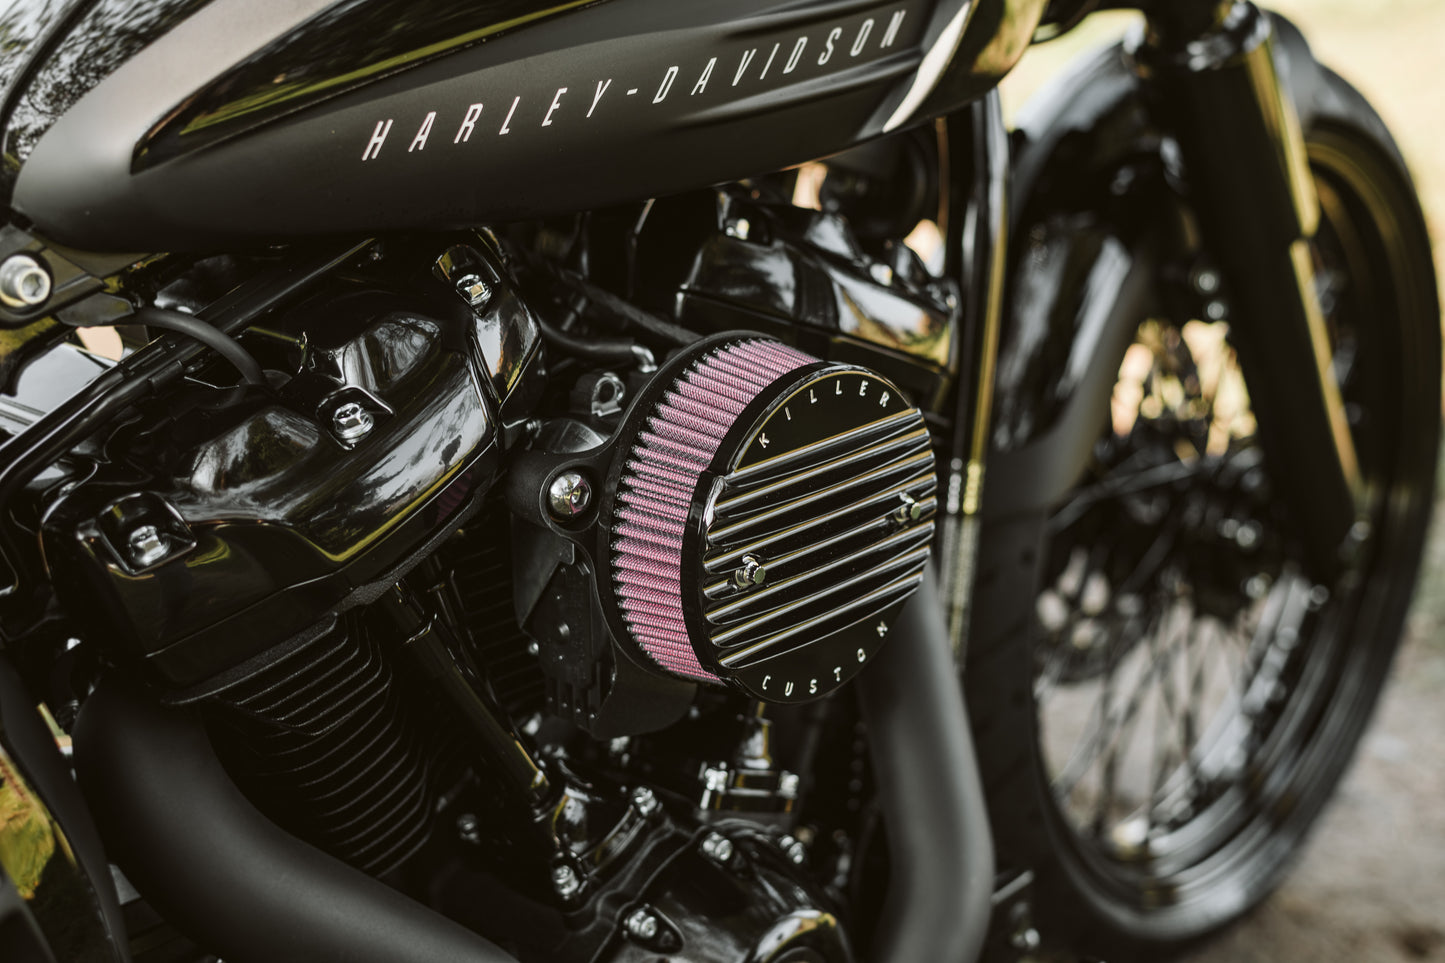 Zoomed Harley Davidson motorcycle with Killer Custom air filter cover for air cleaner kit from the side